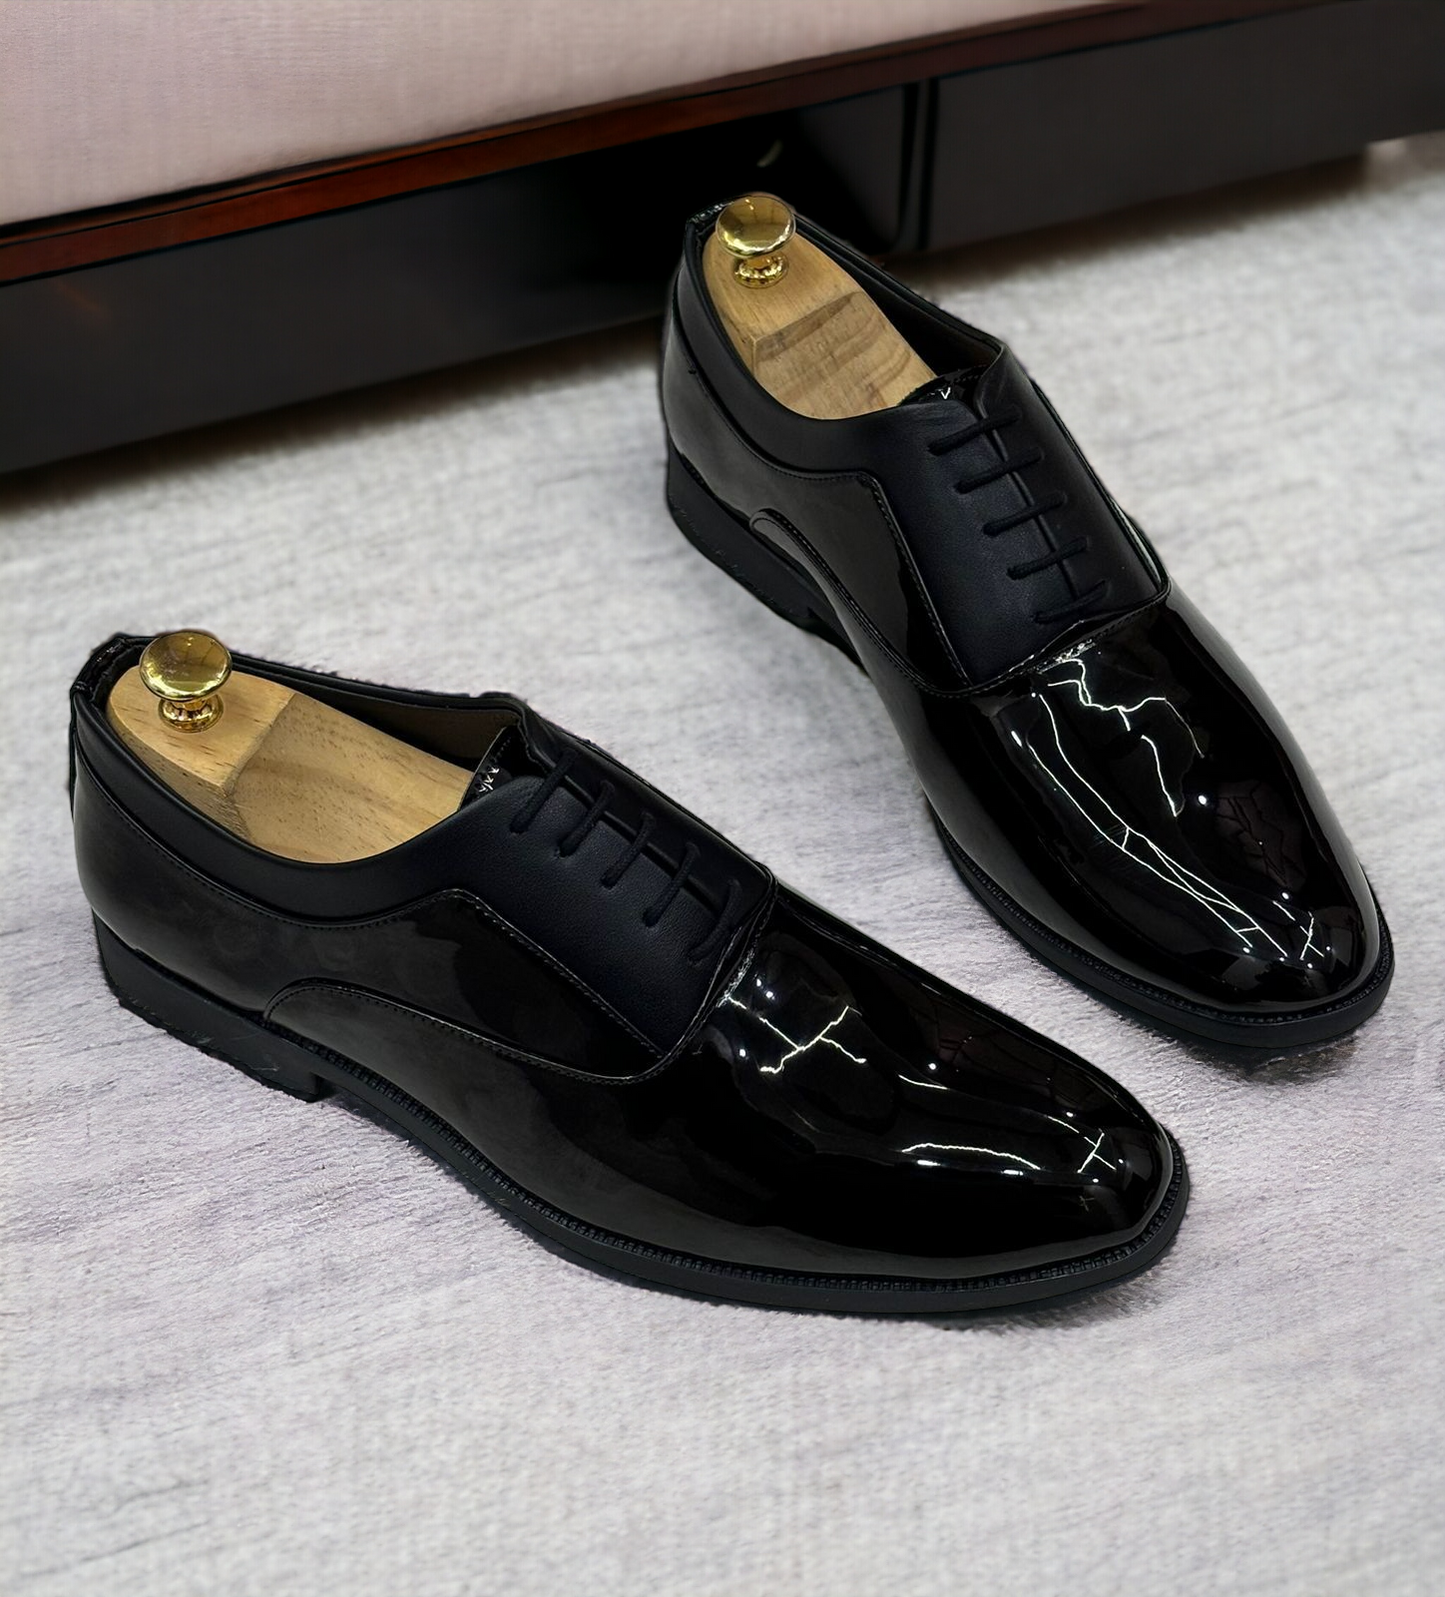 Jack Marc Shiny Oxford Lace-up Shoes Formal Style from Business to Black-Tie - JACKMARC.COM